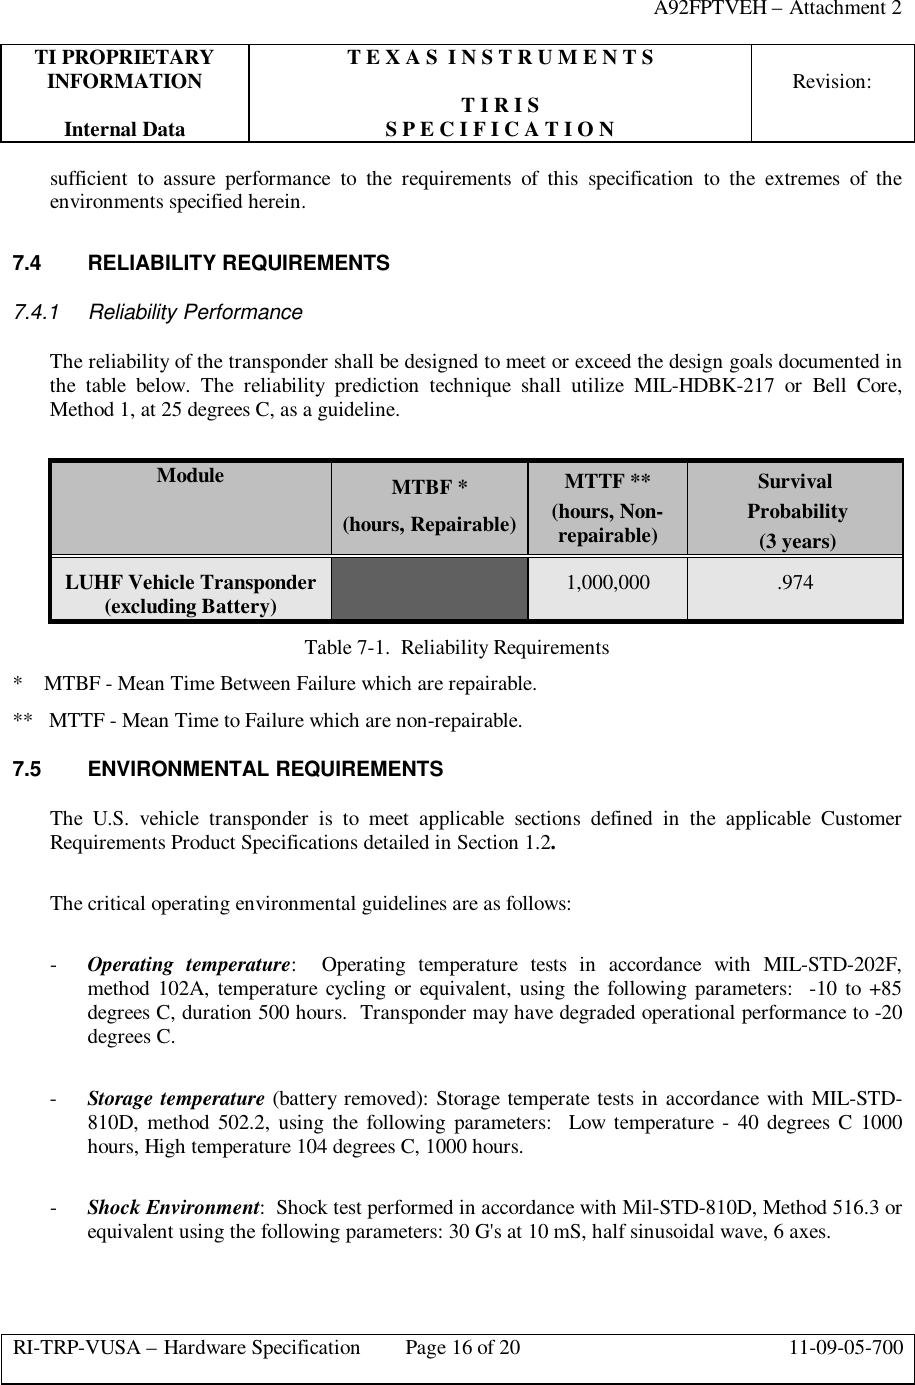 A92FPTVEH – Attachment 2TI PROPRIETARY T E X A S  I N S T R U M E N T SINFORMATION Revision:T I R I SInternal Data S P E C I F I C A T I O NRI-TRP-VUSA – Hardware Specification Page 16 of 20 11-09-05-700sufficient to assure performance to the requirements of this specification to the extremes of theenvironments specified herein.7.4 RELIABILITY REQUIREMENTS7.4.1 Reliability PerformanceThe reliability of the transponder shall be designed to meet or exceed the design goals documented inthe table below. The reliability prediction technique shall utilize MIL-HDBK-217 or Bell Core,Method 1, at 25 degrees C, as a guideline.Module MTBF *(hours, Repairable)MTTF **(hours, Non-repairable)Survival Probability (3 years)LUHF Vehicle Transponder(excluding Battery) 1,000,000 .974Table 7-1.  Reliability Requirements*    MTBF - Mean Time Between Failure which are repairable.**   MTTF - Mean Time to Failure which are non-repairable.7.5 ENVIRONMENTAL REQUIREMENTSThe U.S. vehicle transponder is to meet applicable sections defined in the applicable CustomerRequirements Product Specifications detailed in Section 1.2.The critical operating environmental guidelines are as follows:- Operating temperature:  Operating temperature tests in accordance with MIL-STD-202F,method 102A, temperature cycling or equivalent, using the following parameters:  -10 to +85degrees C, duration 500 hours.  Transponder may have degraded operational performance to -20degrees C.- Storage temperature (battery removed): Storage temperate tests in accordance with MIL-STD-810D, method 502.2, using the following parameters:  Low temperature - 40 degrees C 1000hours, High temperature 104 degrees C, 1000 hours.- Shock Environment:  Shock test performed in accordance with Mil-STD-810D, Method 516.3 orequivalent using the following parameters: 30 G&apos;s at 10 mS, half sinusoidal wave, 6 axes.